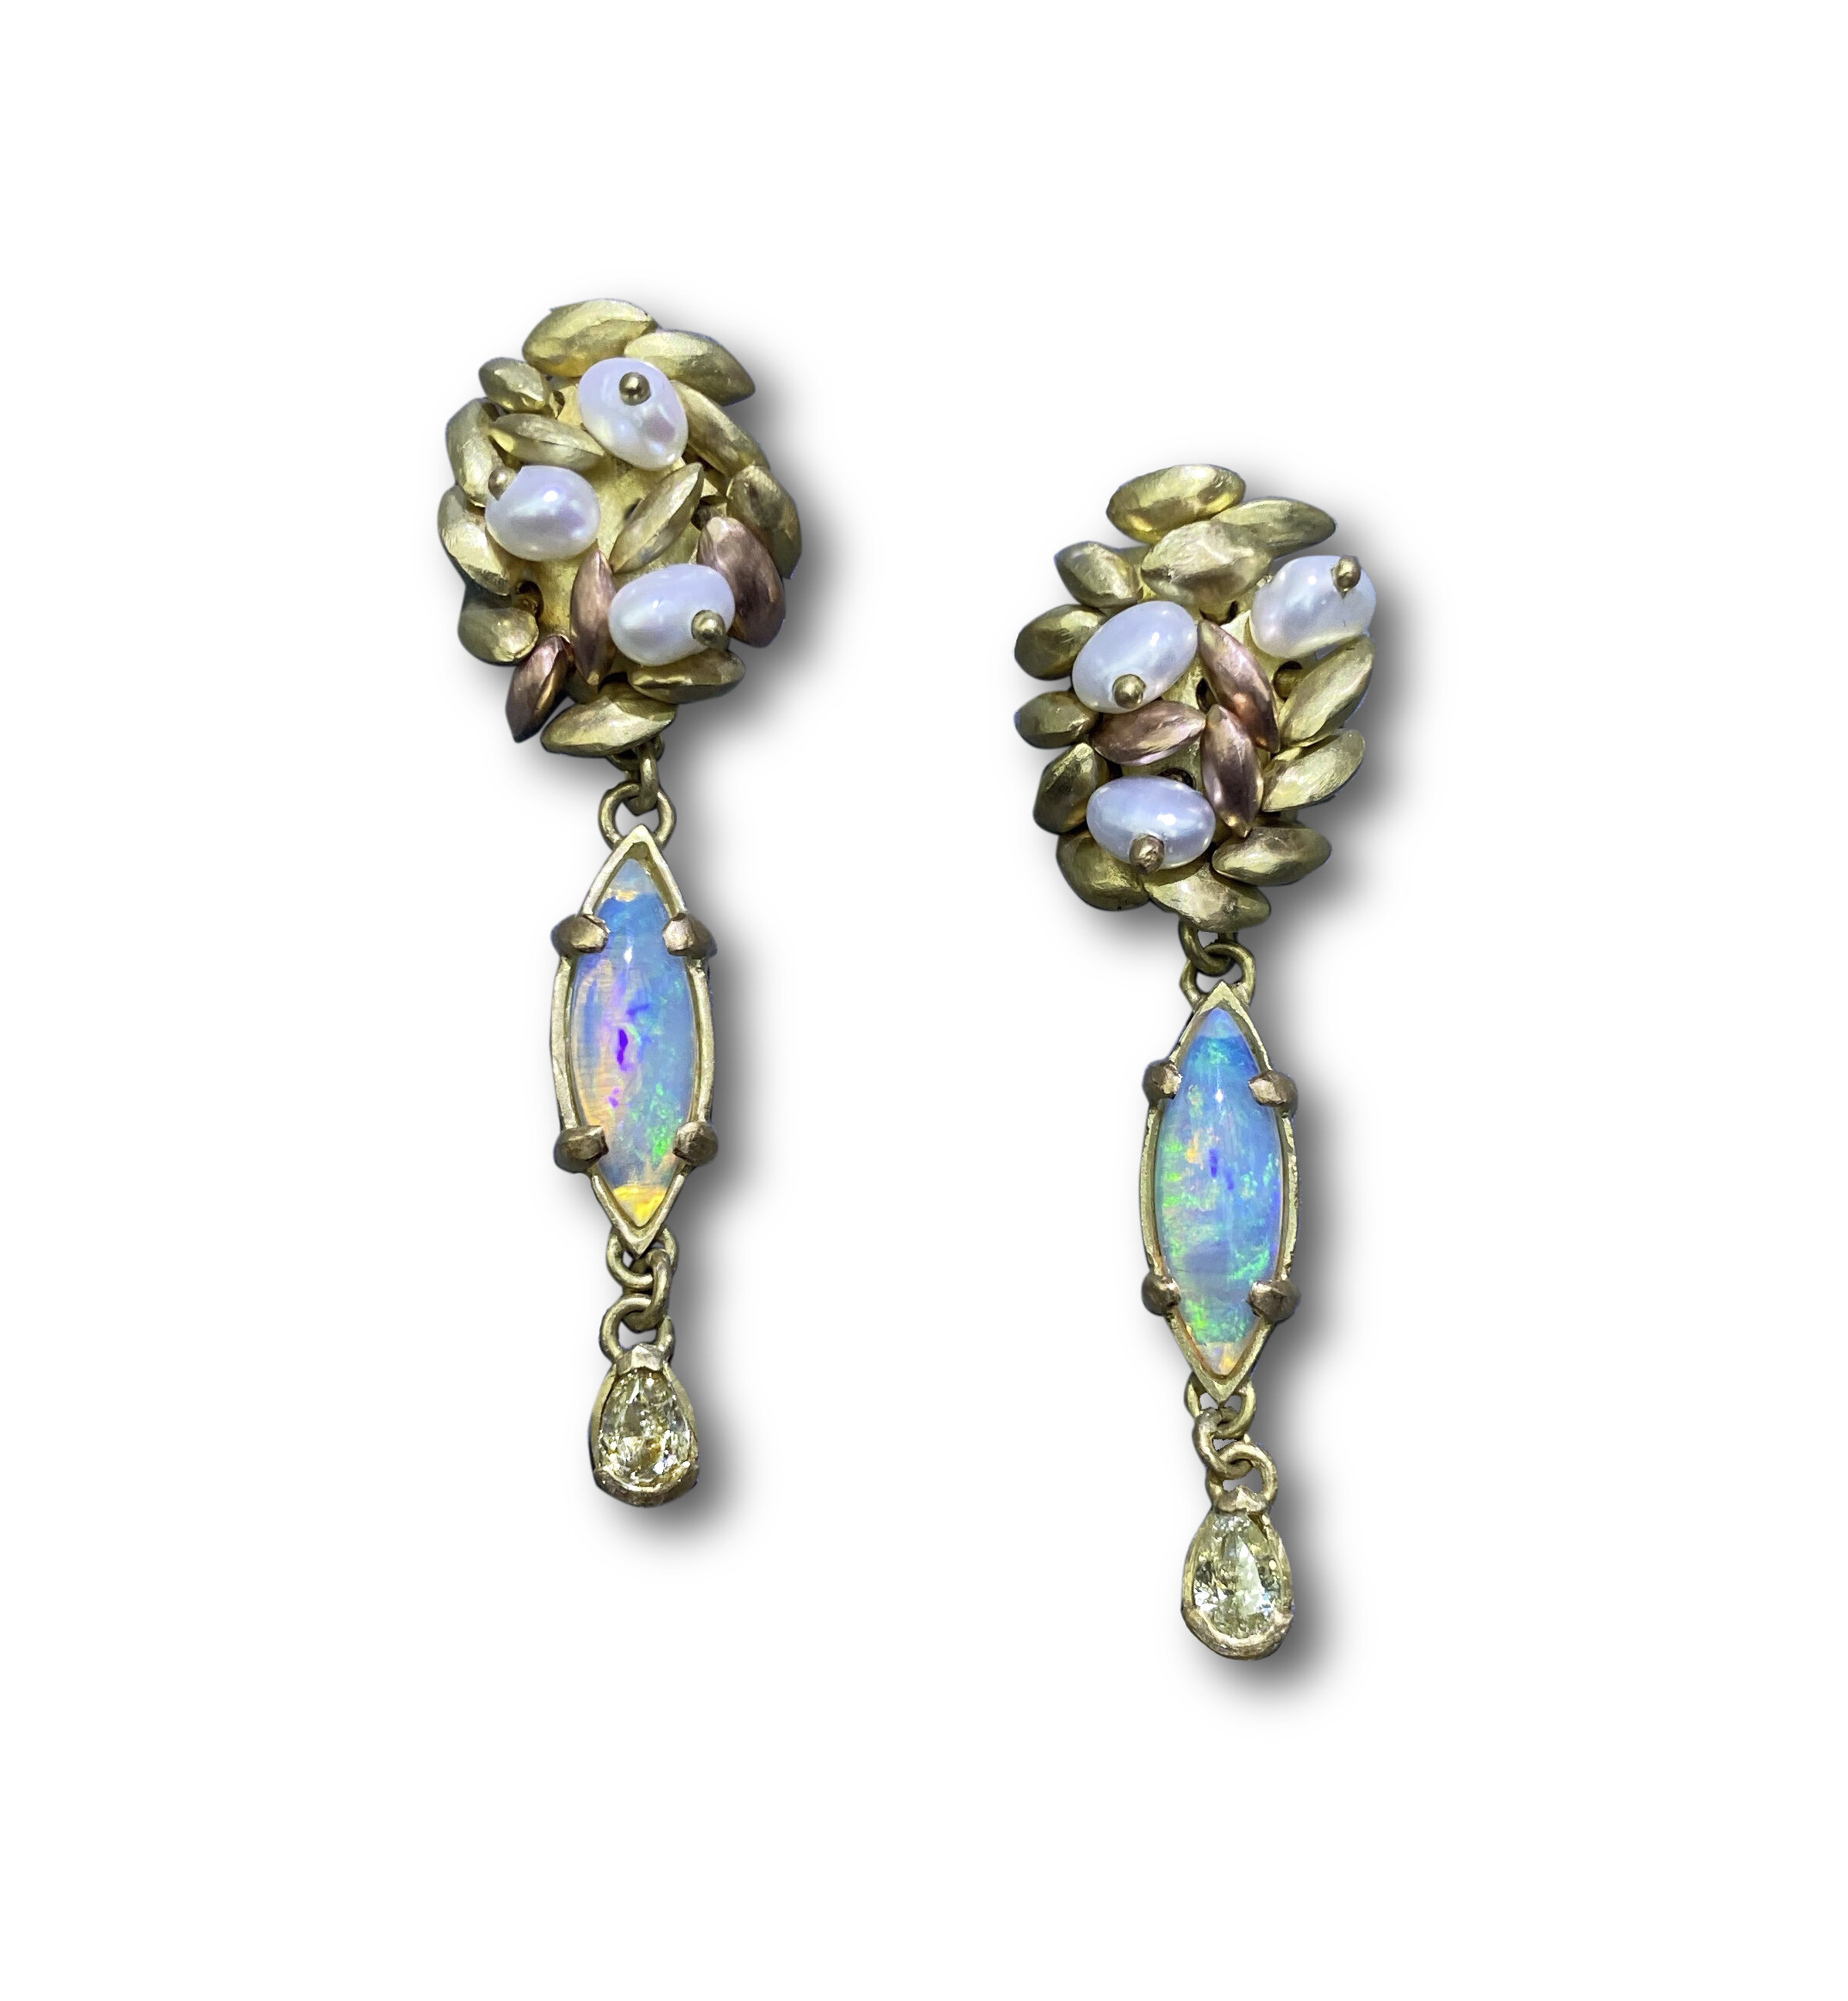 acini gold earrings with pearls, opals and diamonds